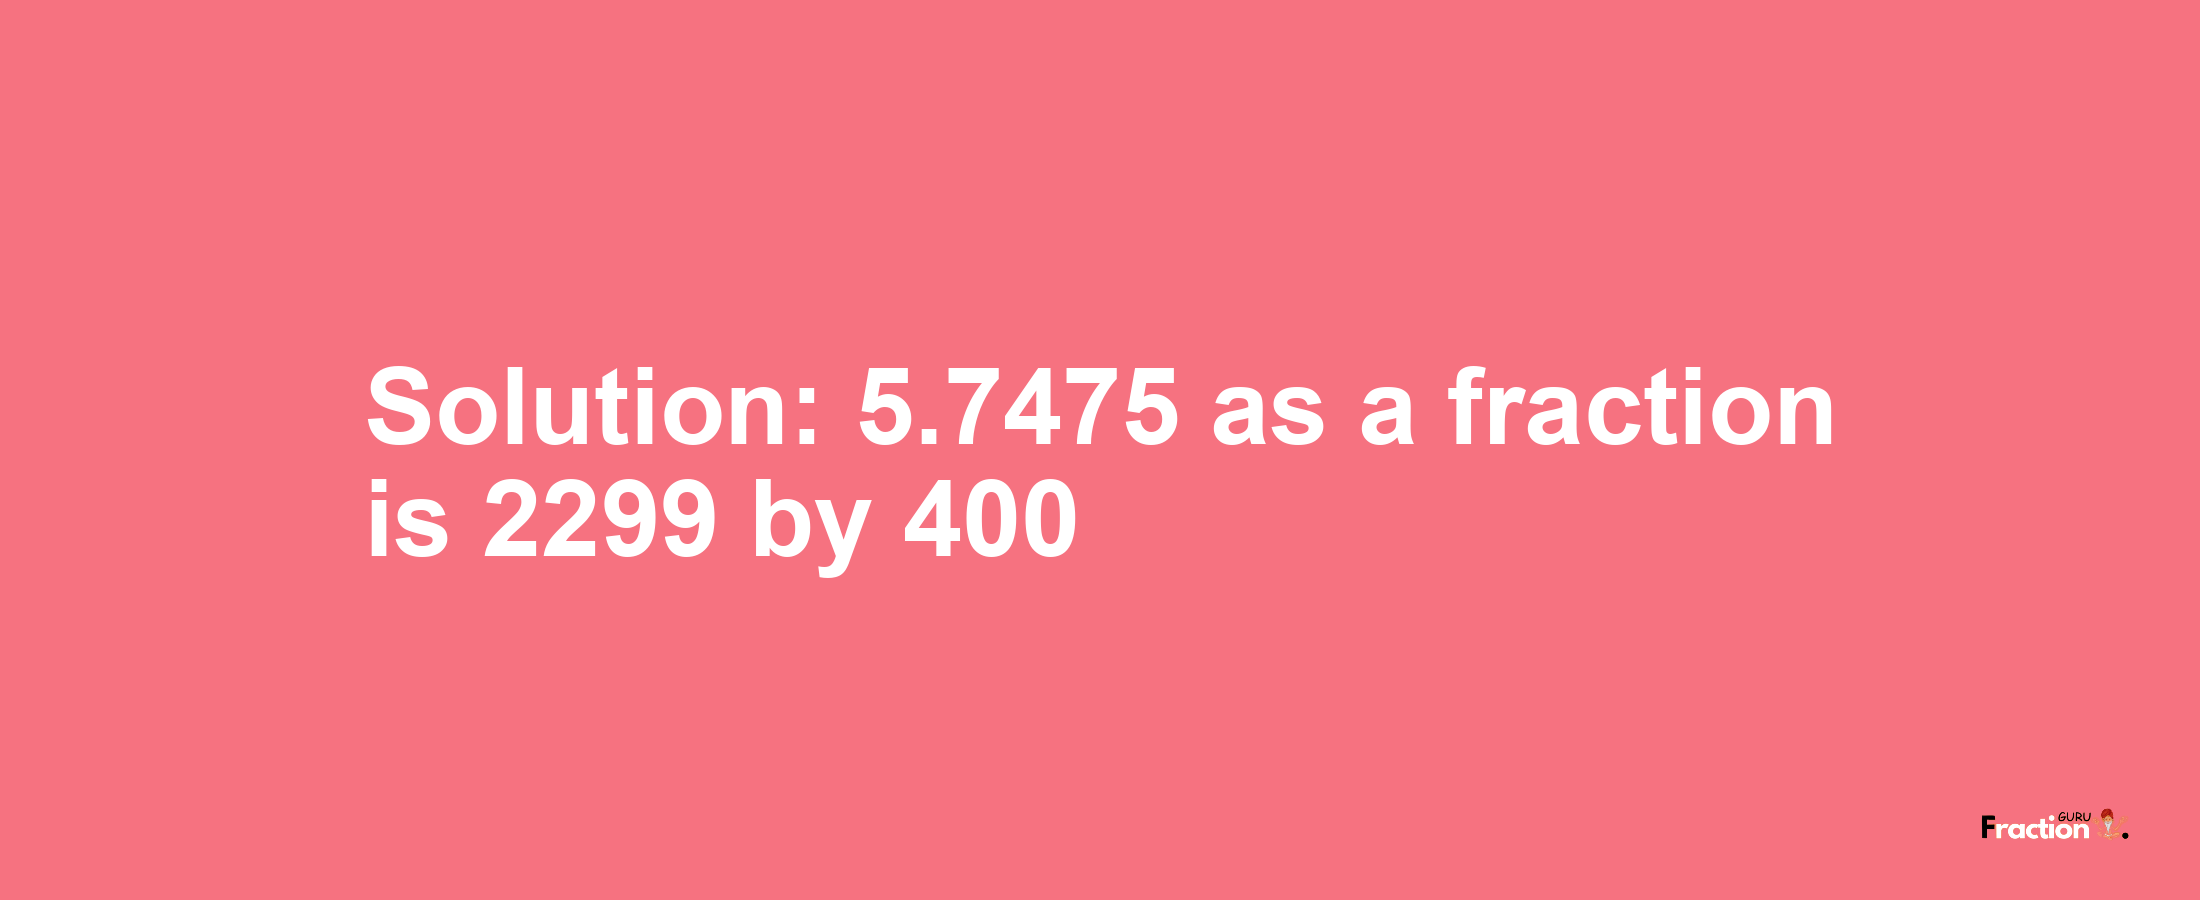 Solution:5.7475 as a fraction is 2299/400